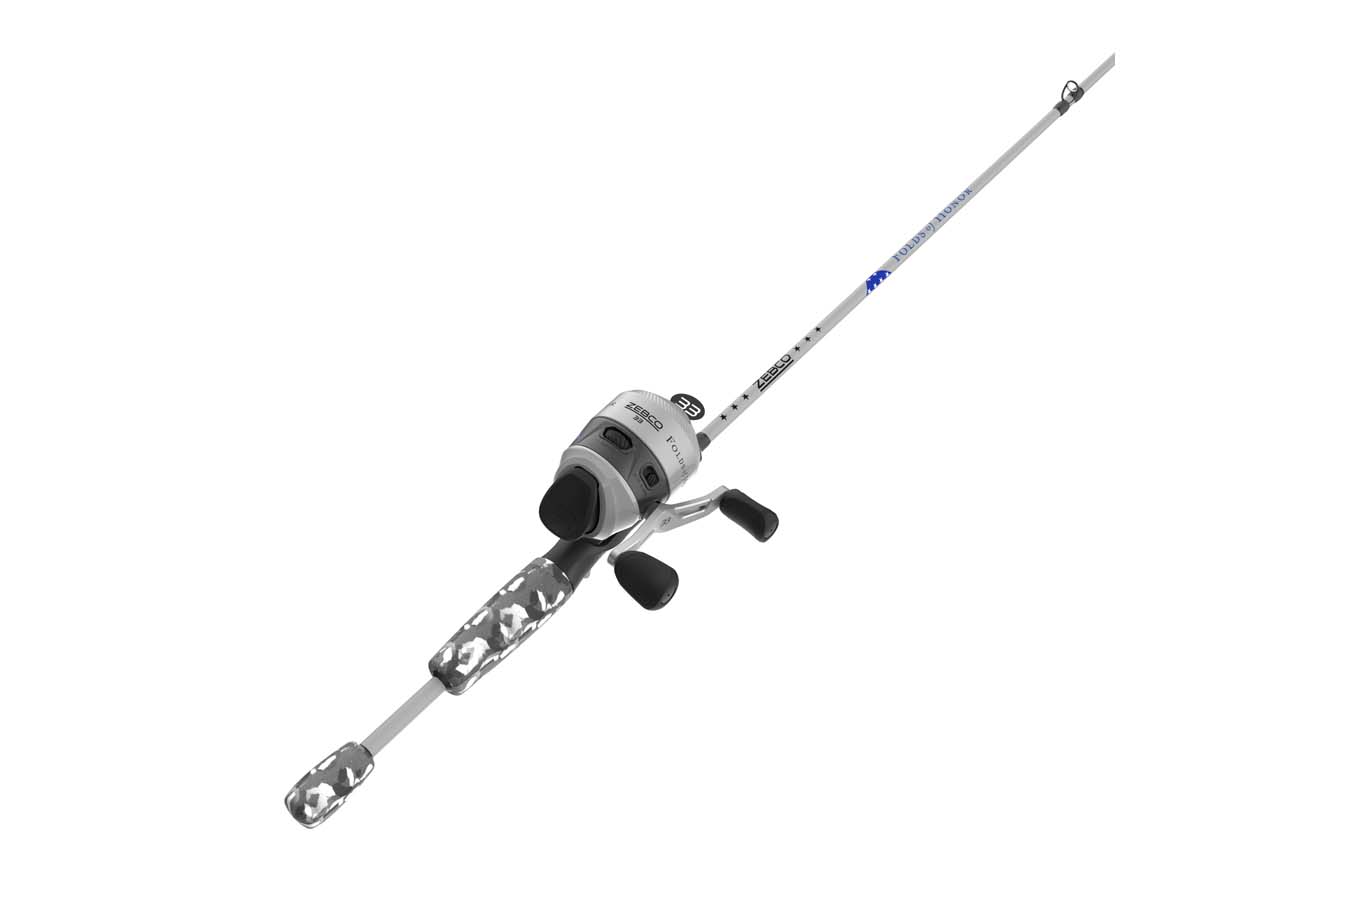 Discount Zebco Folds of honor Spincast Combo for Sale, Online Fishing Rod/ Reel Combo Store